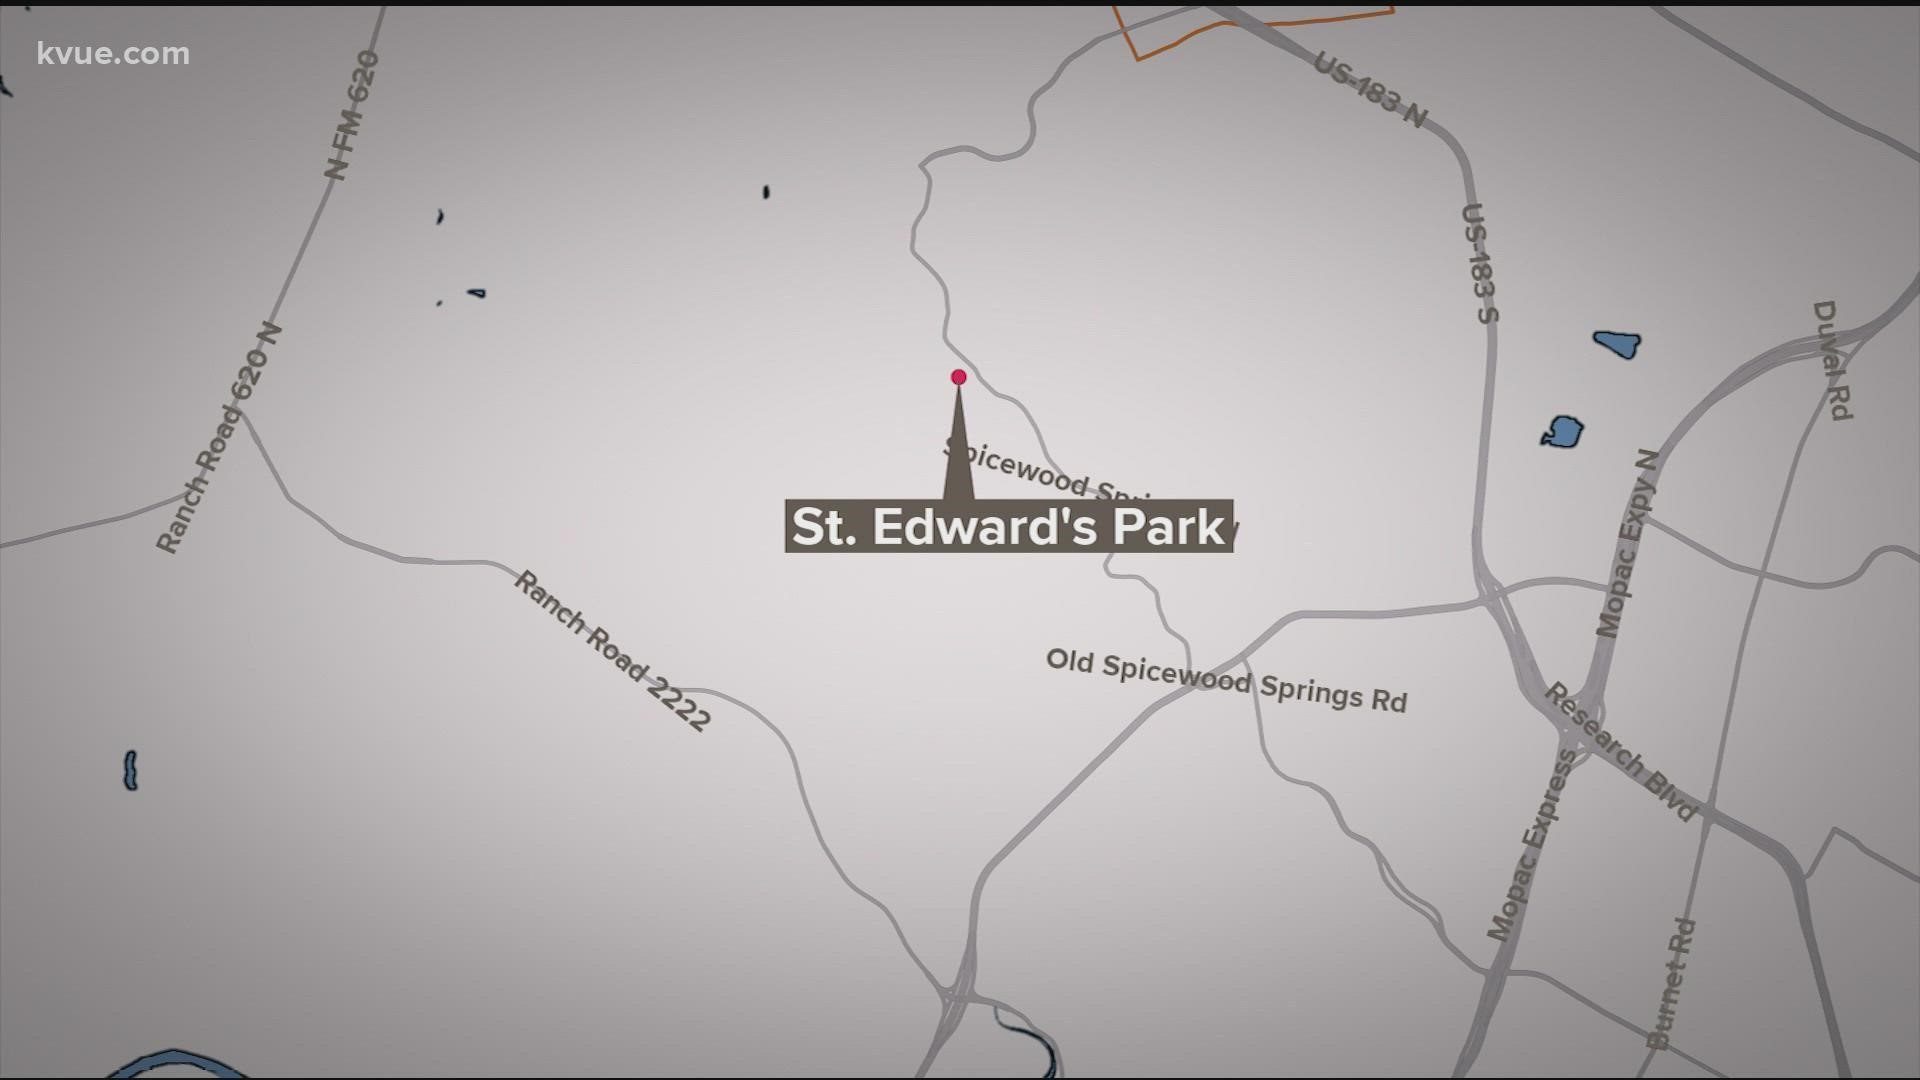 The incident happened just after 10 a.m. around 7301 Spicewood Springs Road, according to Austin-Travis County EMS.